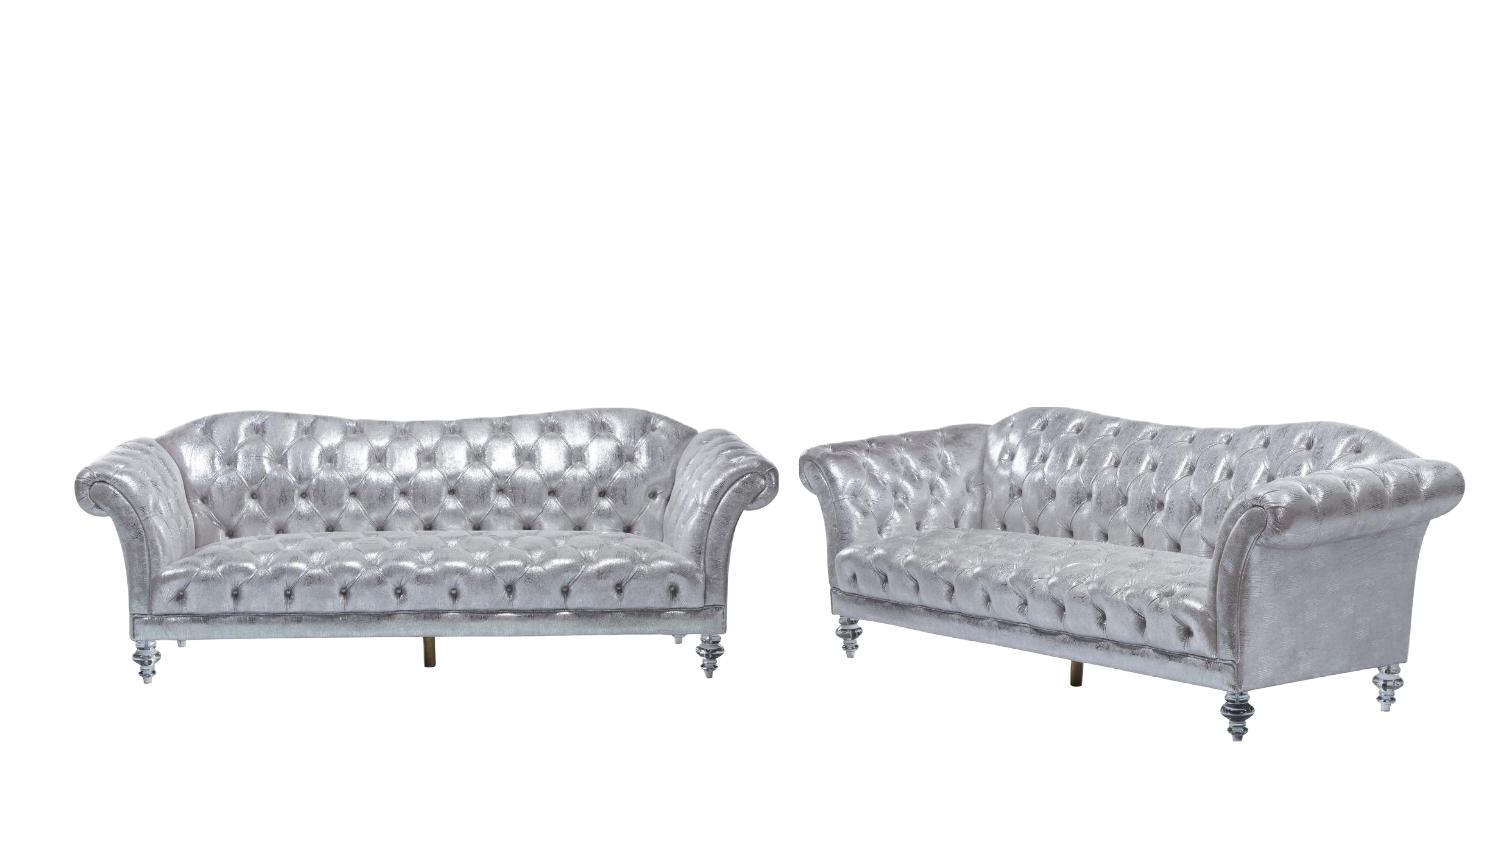 Classic,  Vintage Sofa and Loveseat Set Dixie 52780-2pcs in Silver Fabric